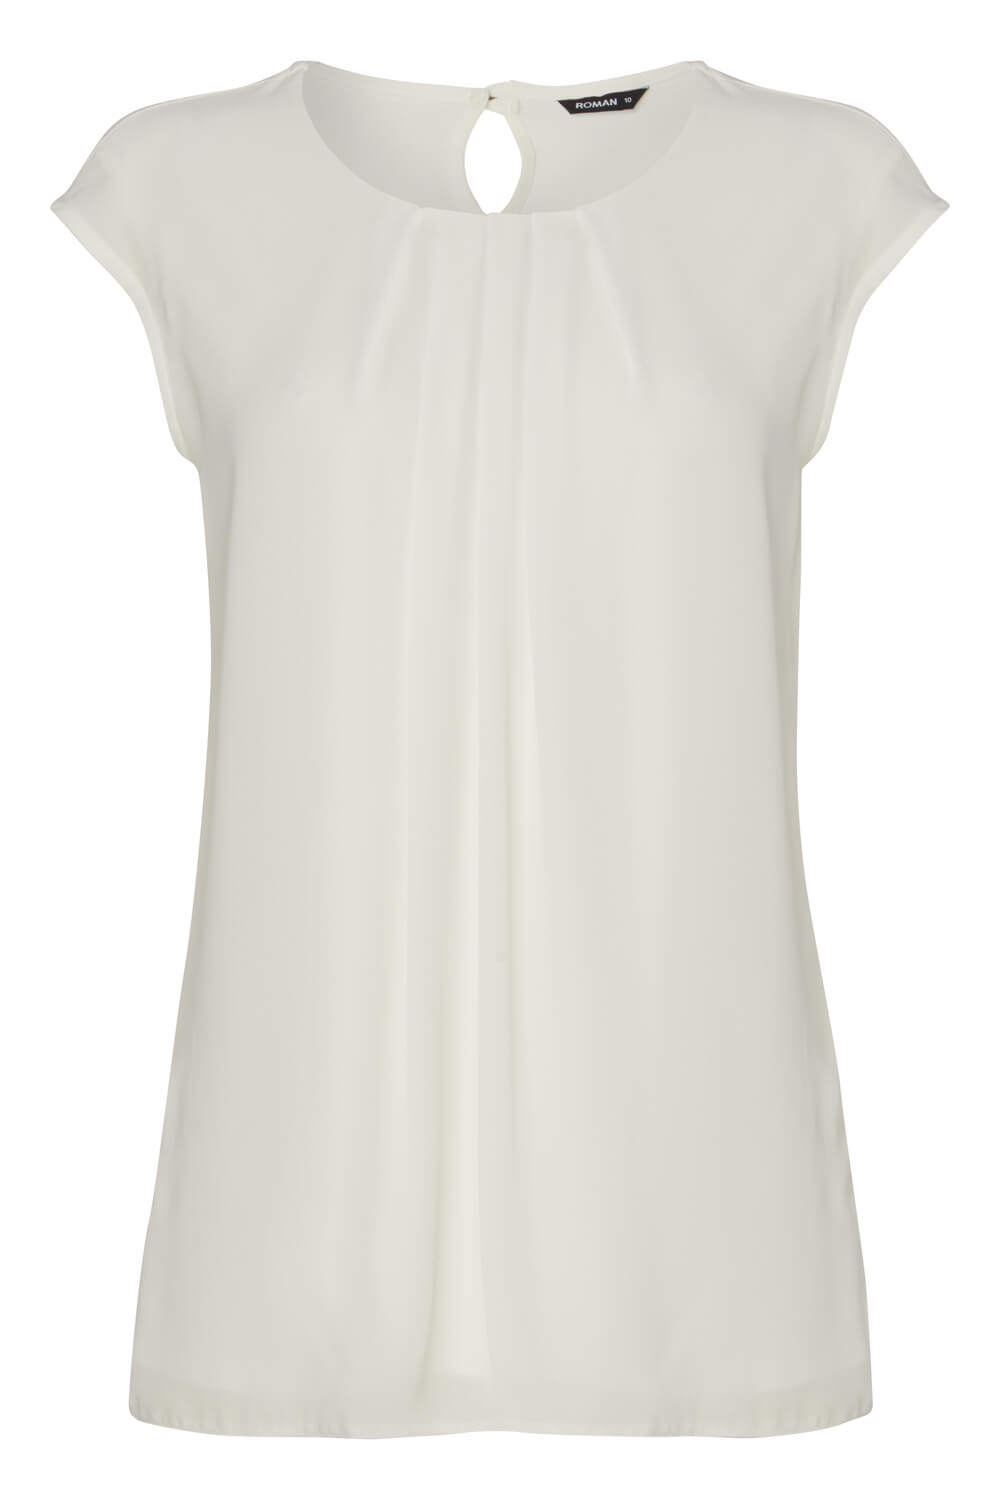 Ivory  Chiffon Front Pleat Top, Image 4 of 4